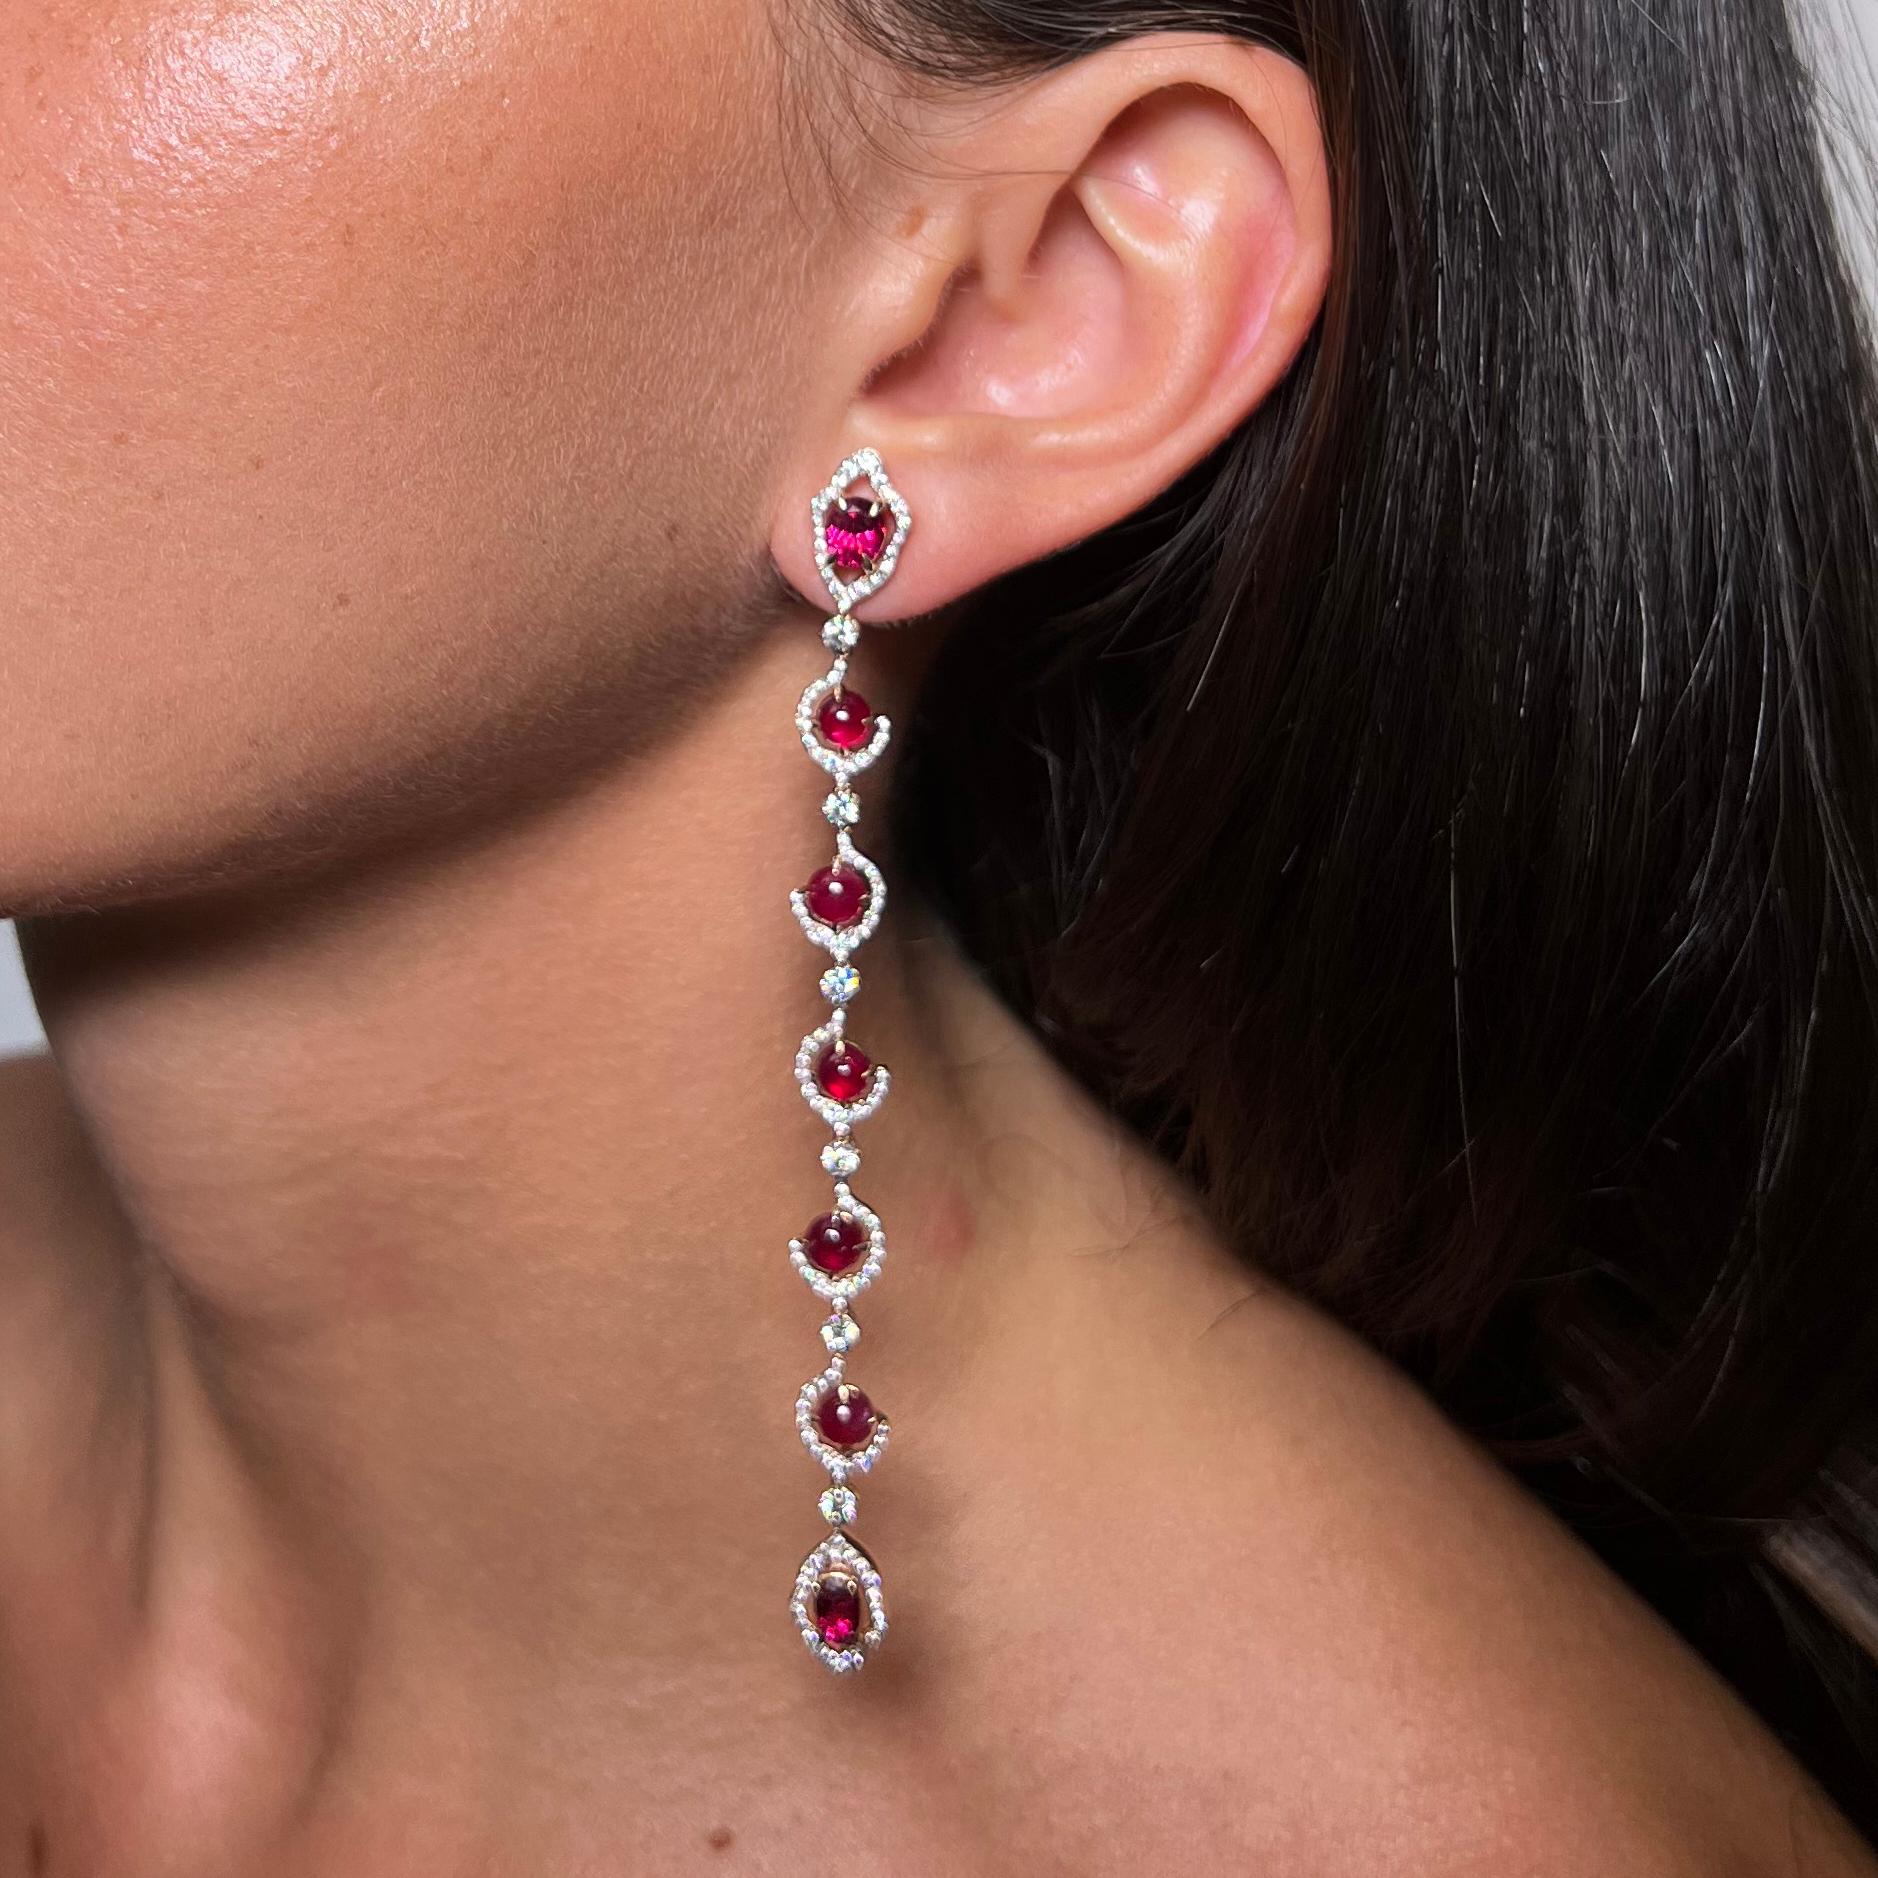 18 Karat Rose Gold, White Diamonds, Rubies and Rubellite Stiletto Earrings In New Condition For Sale In Mayfair, London, GB